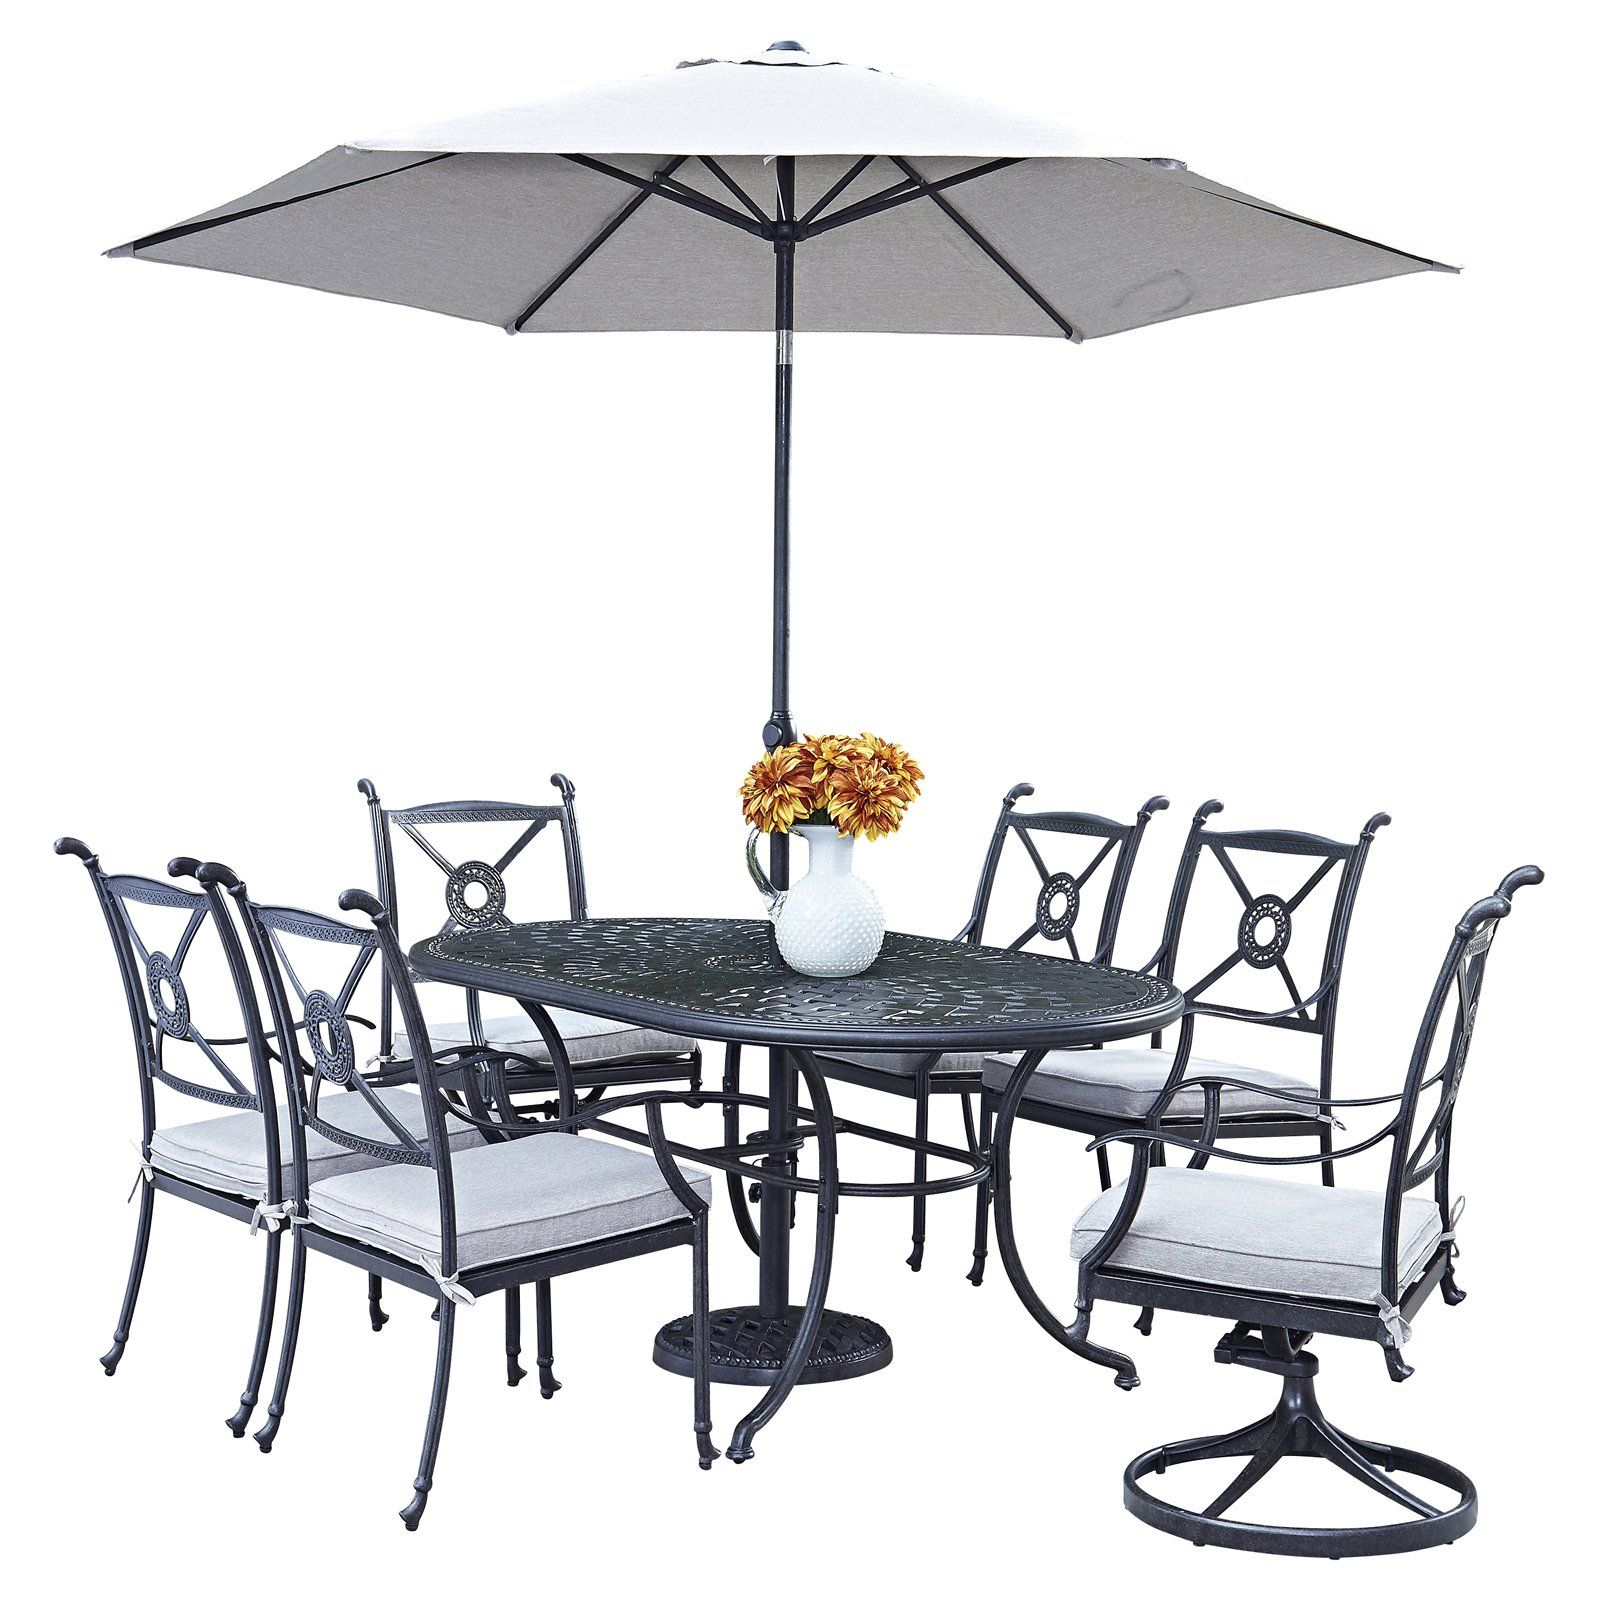 7 Piece Outdoor Oval Dining Sets Pertaining To Fashionable Home Styles Athens Cast Aluminum 7 Piece Oval Patio Dining Set With (View 14 of 15)